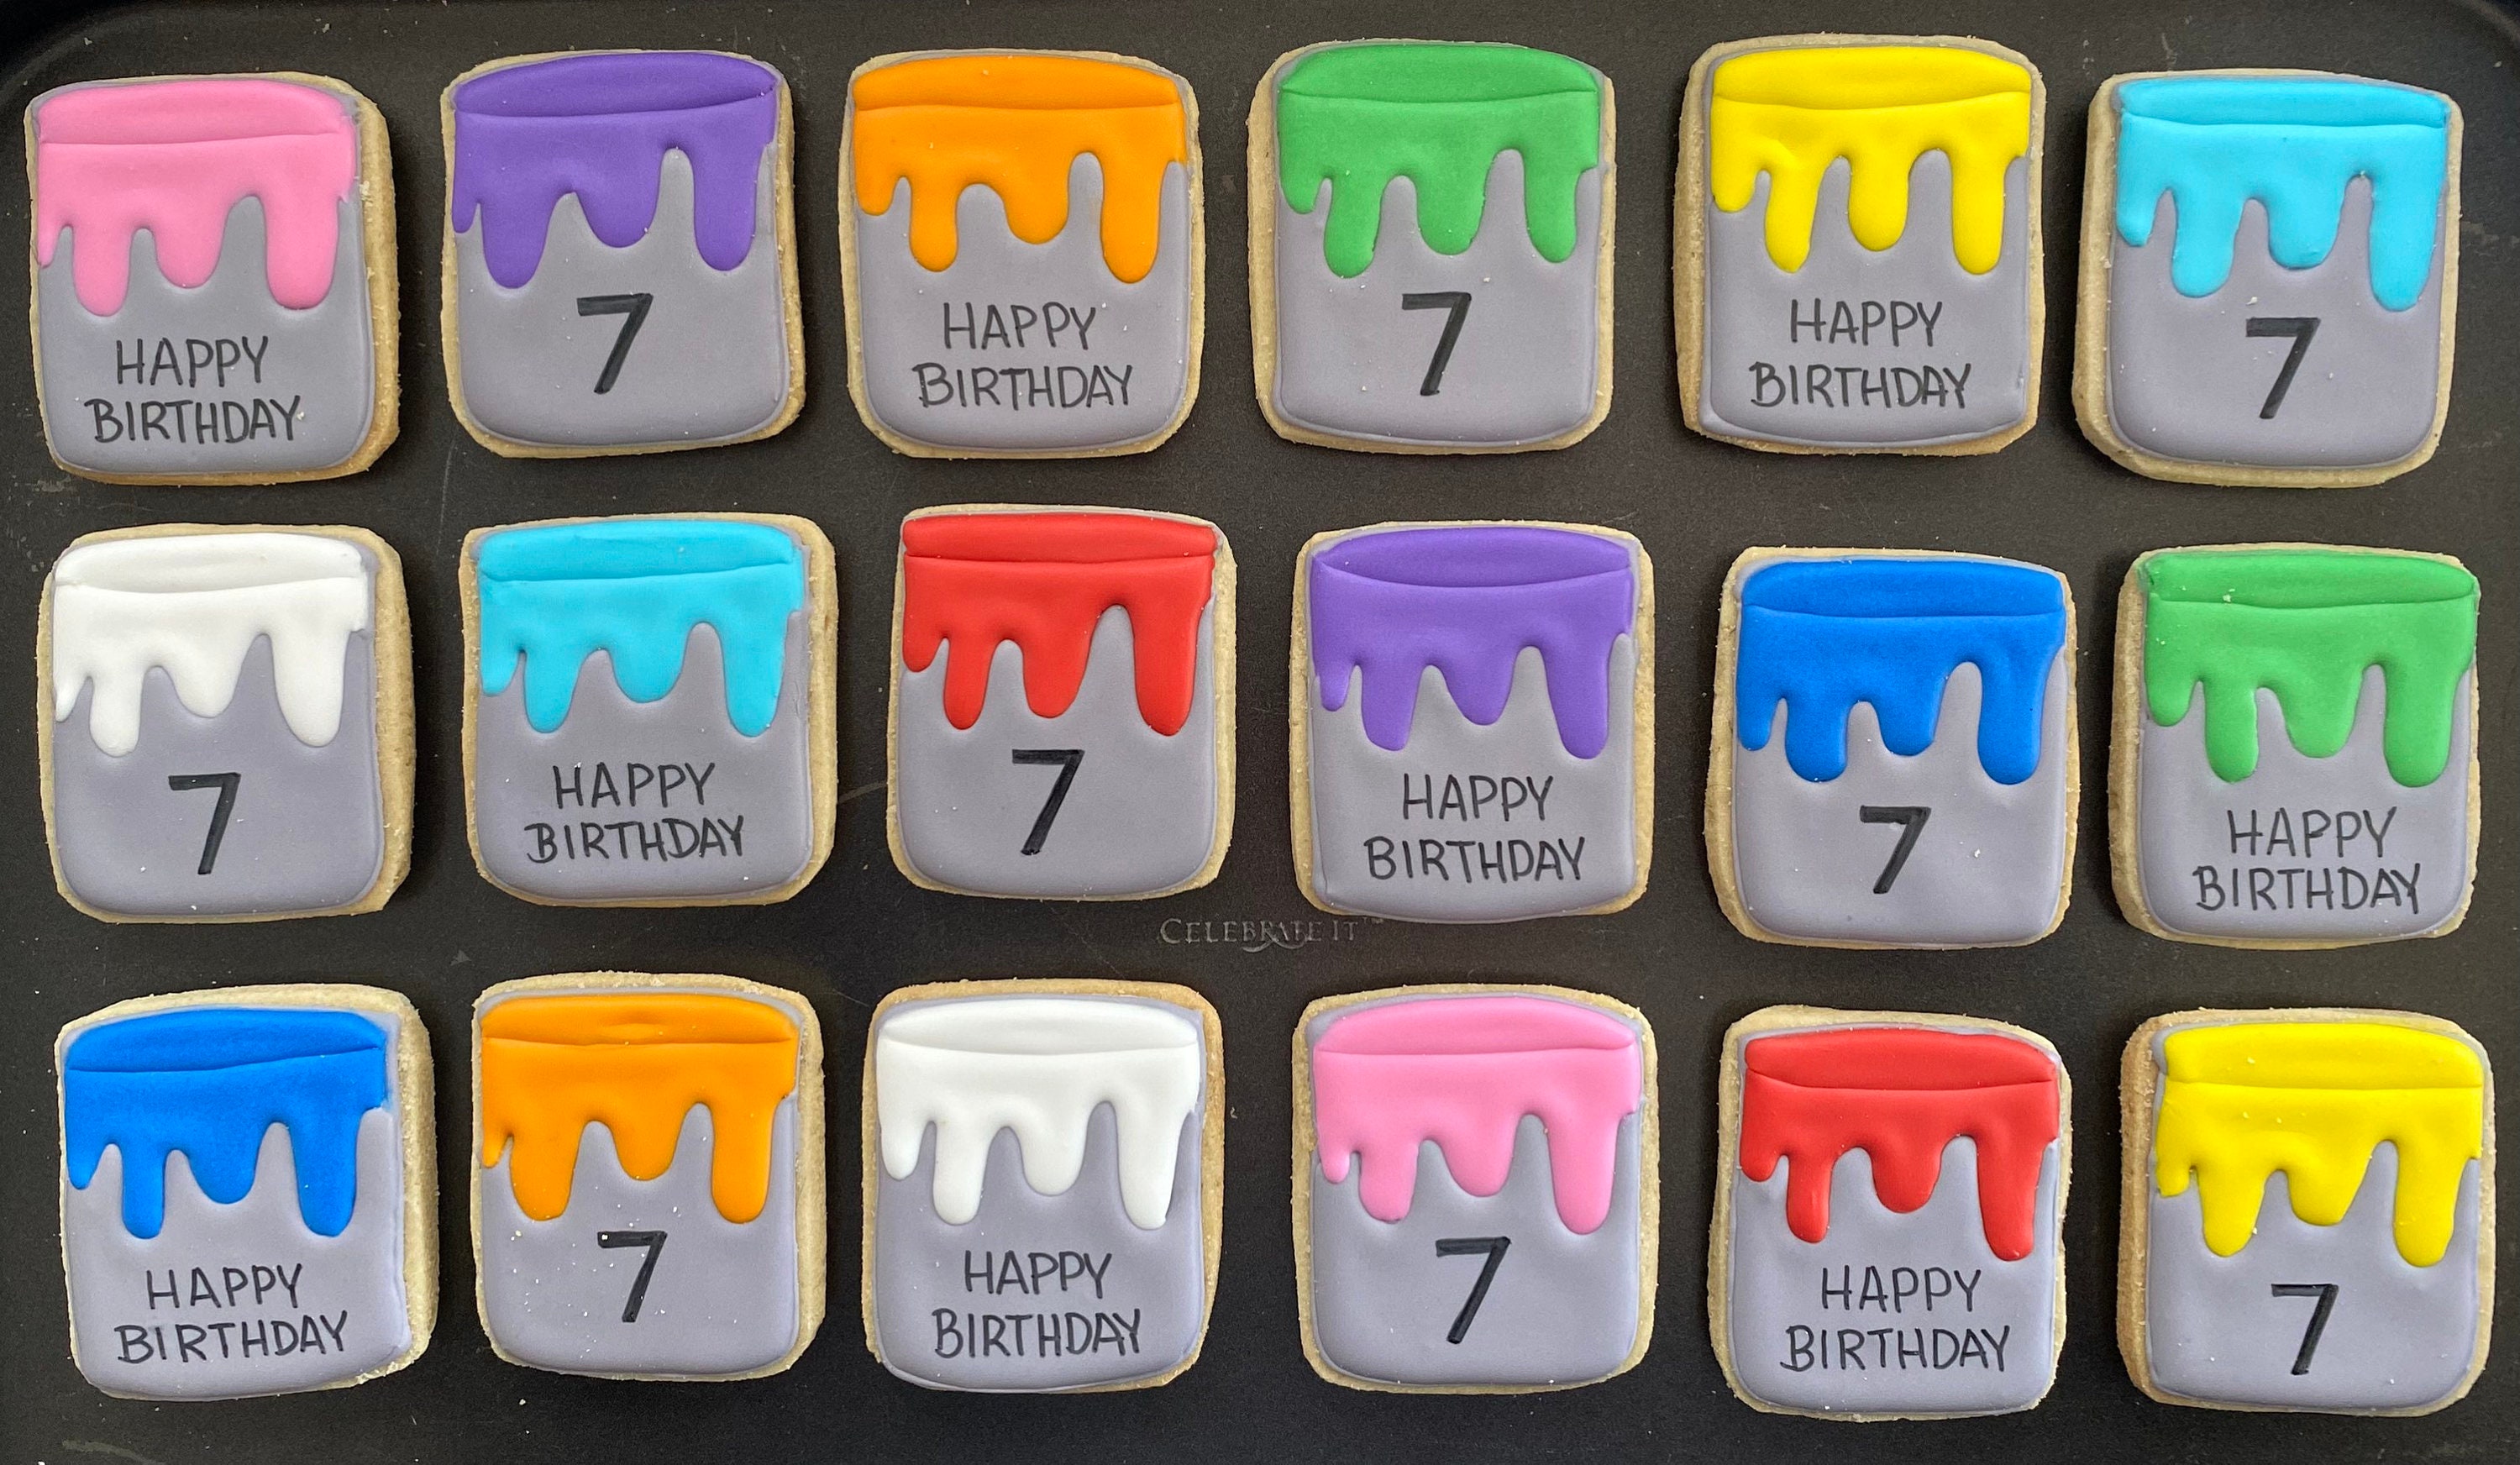 Artist Painter Birthday Party Sugar Cookies — The Iced Sugar Cookie